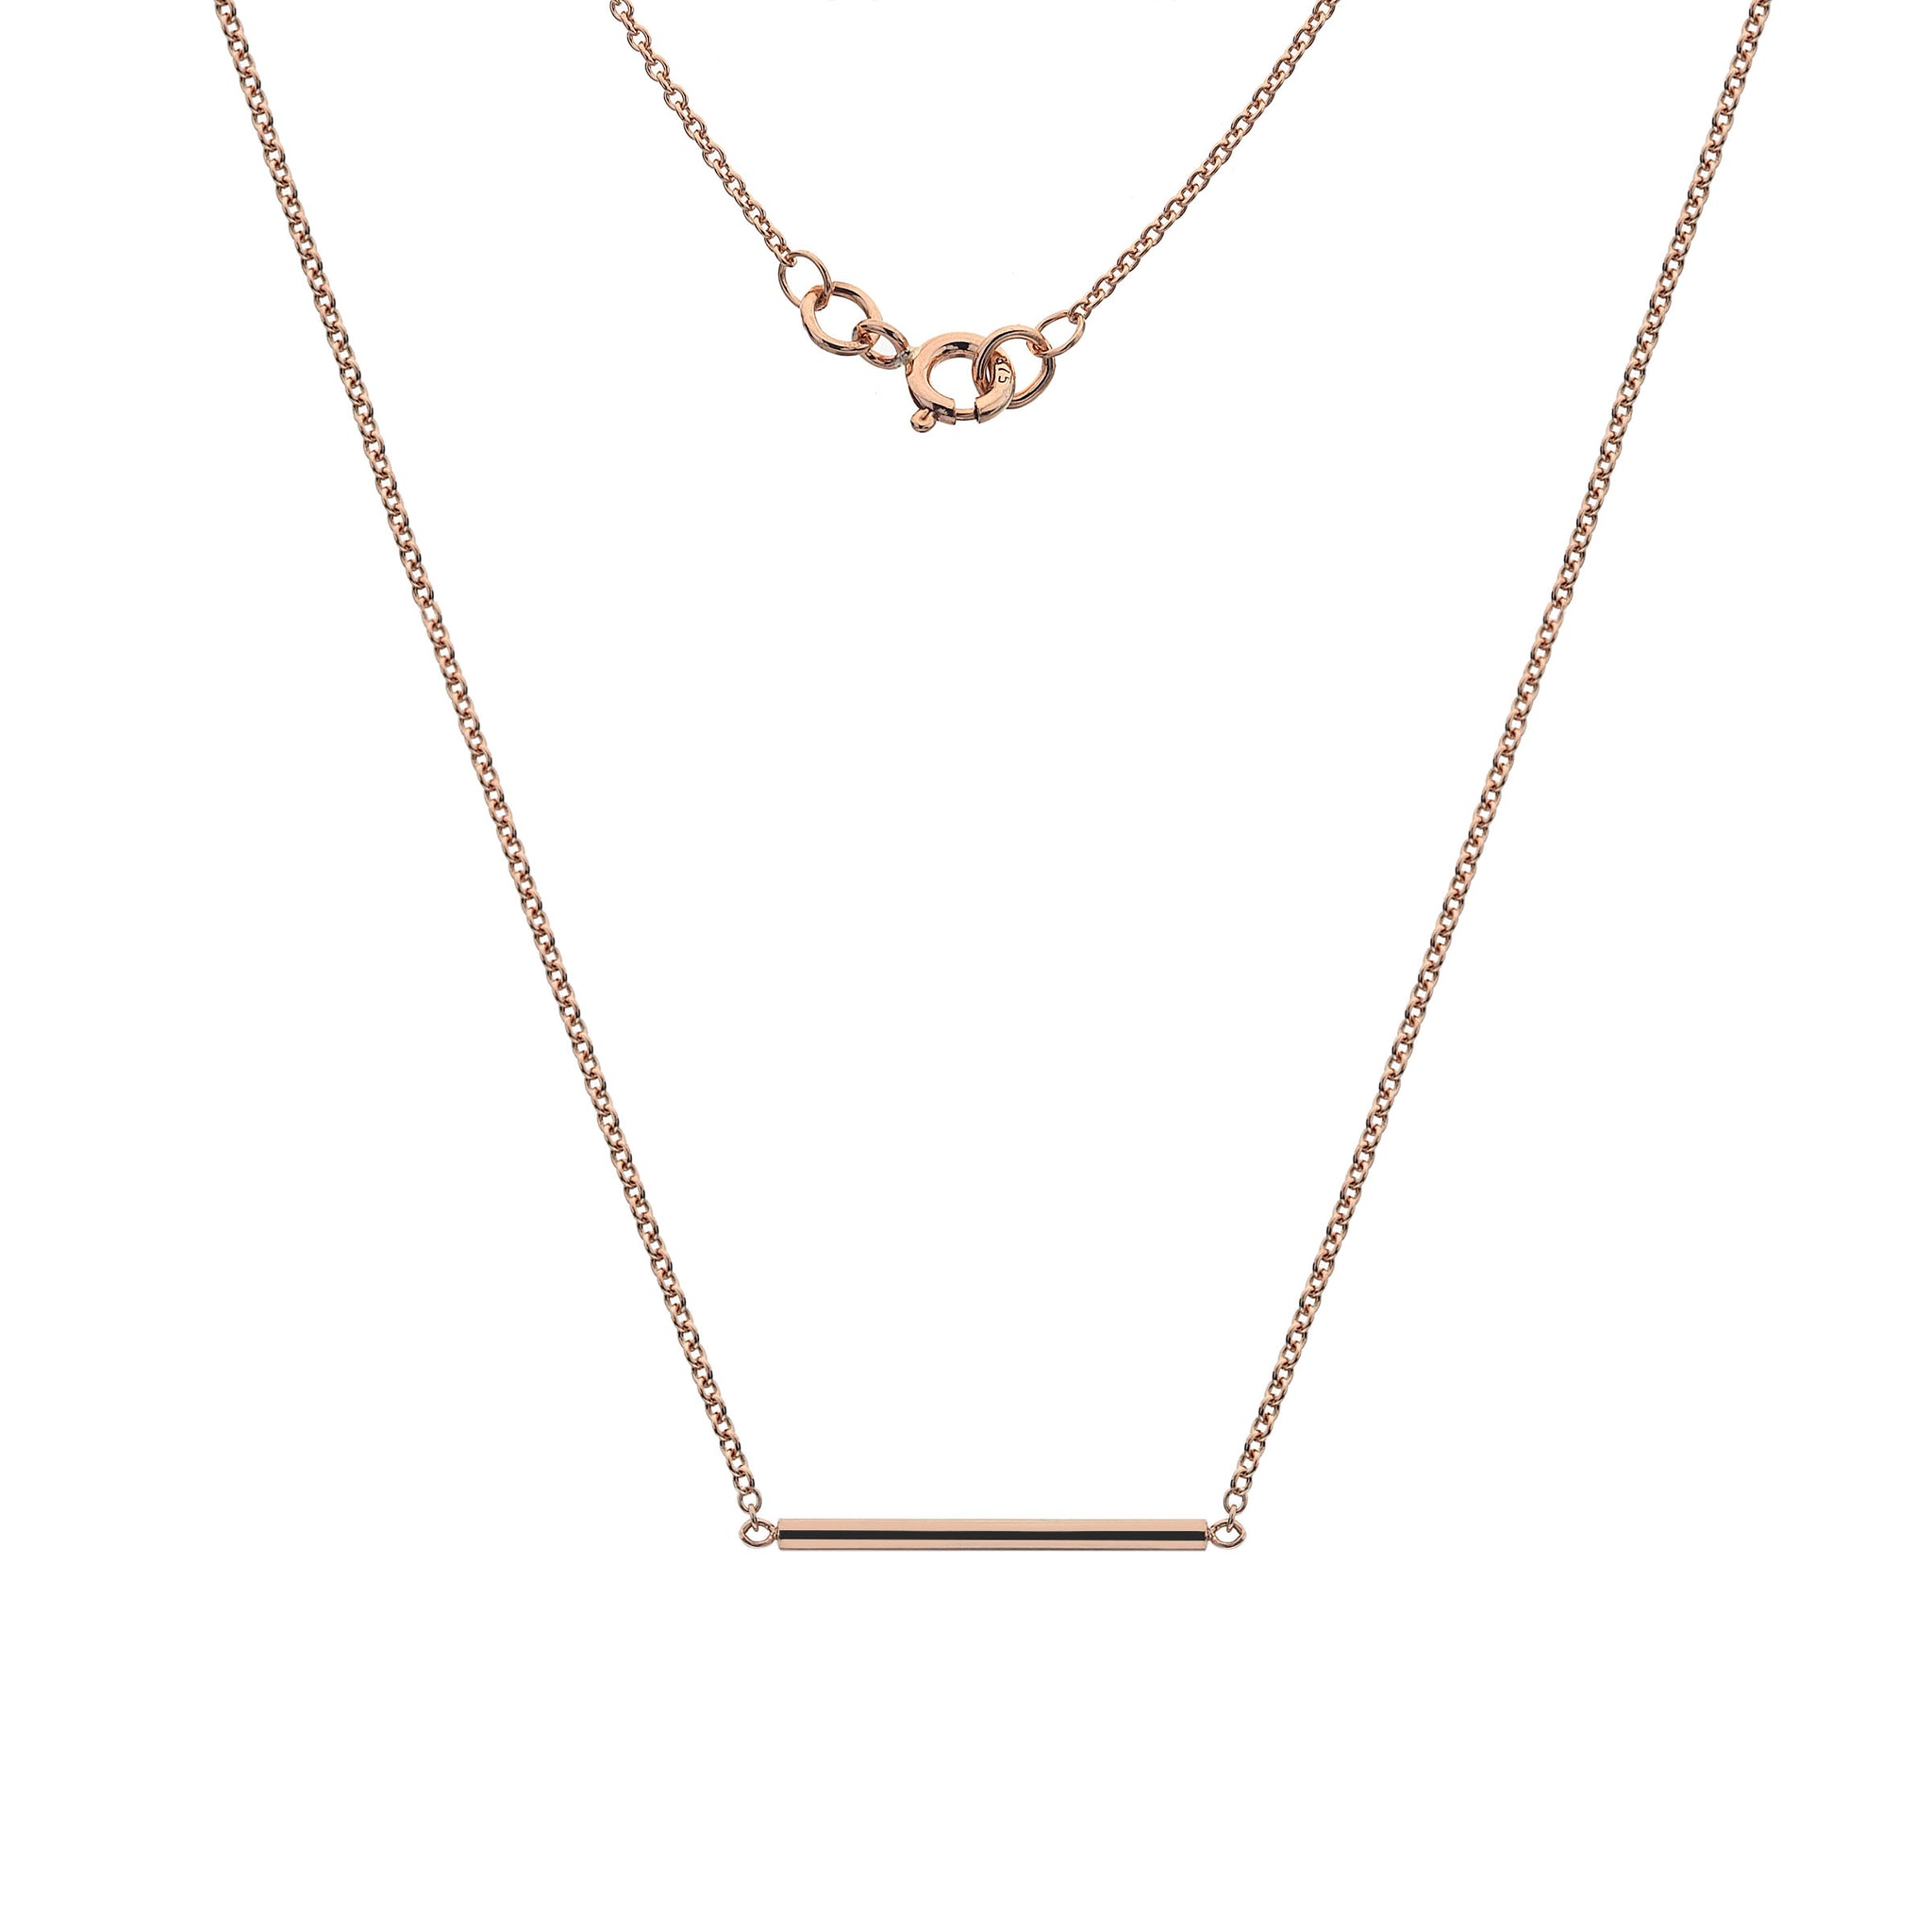 Rounded Bar Necklace